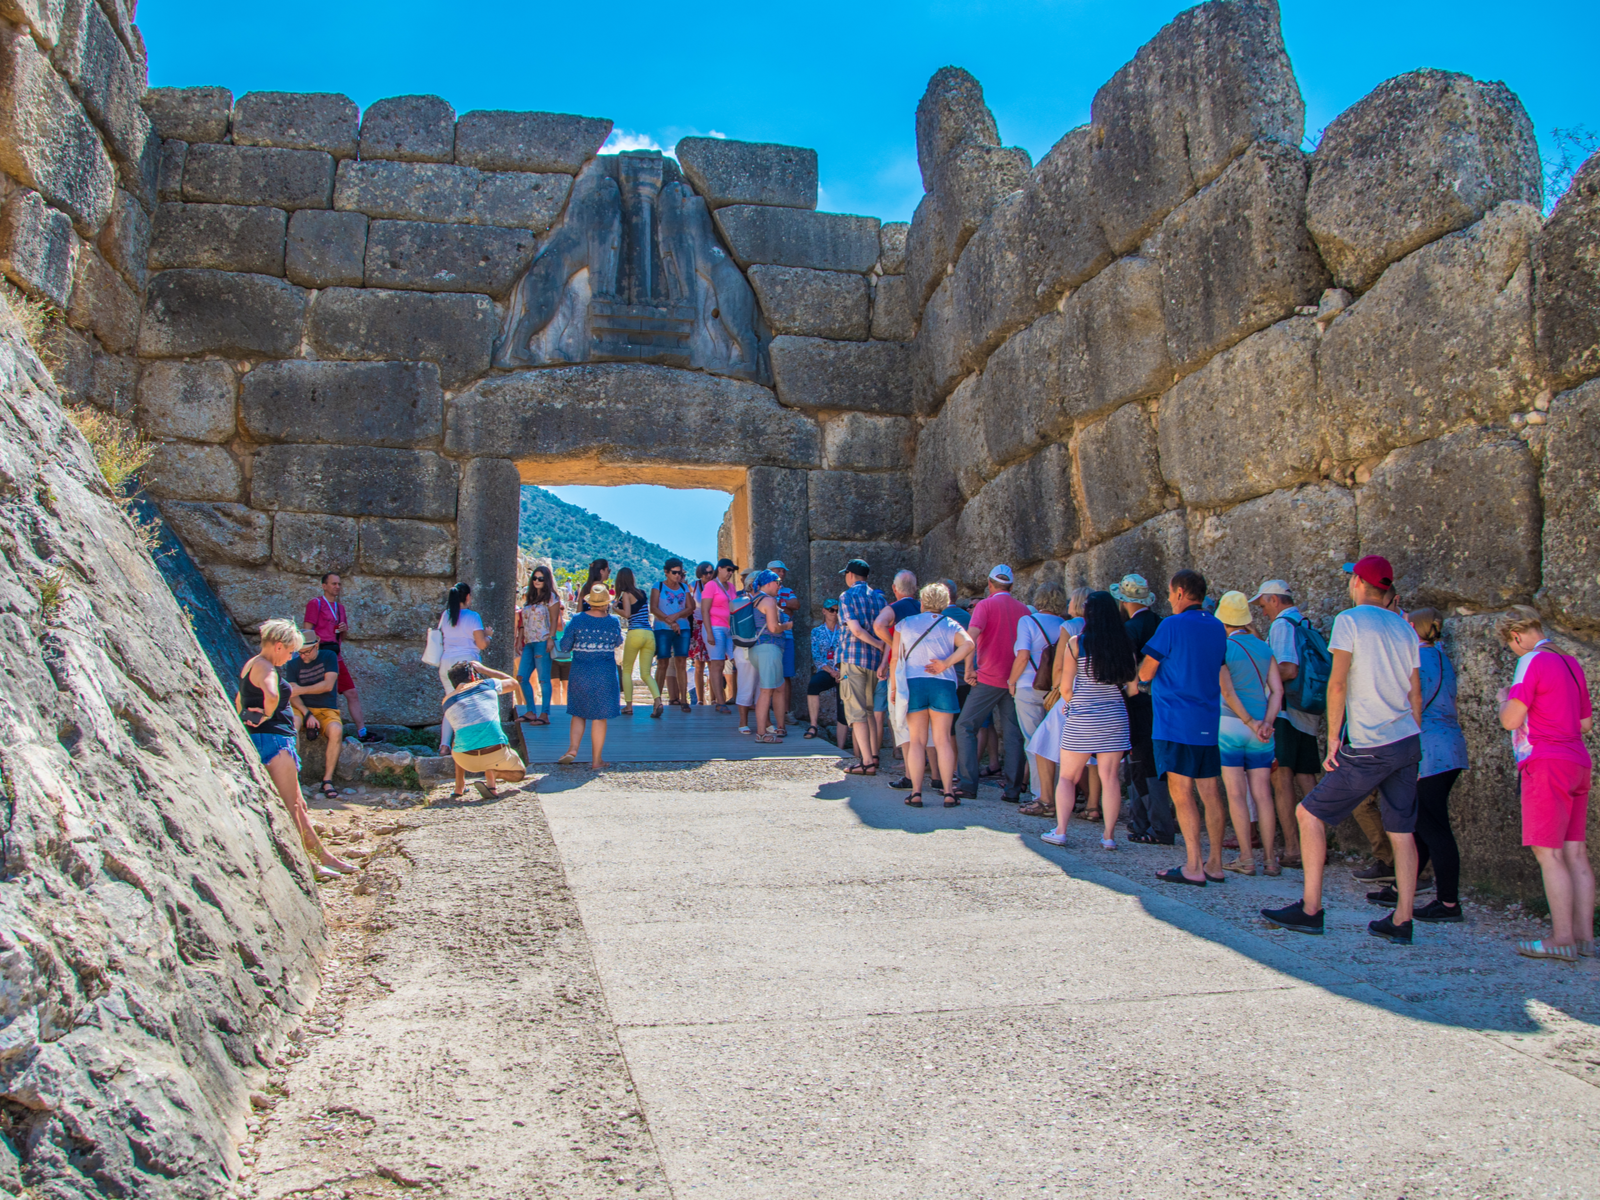 Tourists queuing while taking shade on the shadow casted by an old wall at Lion